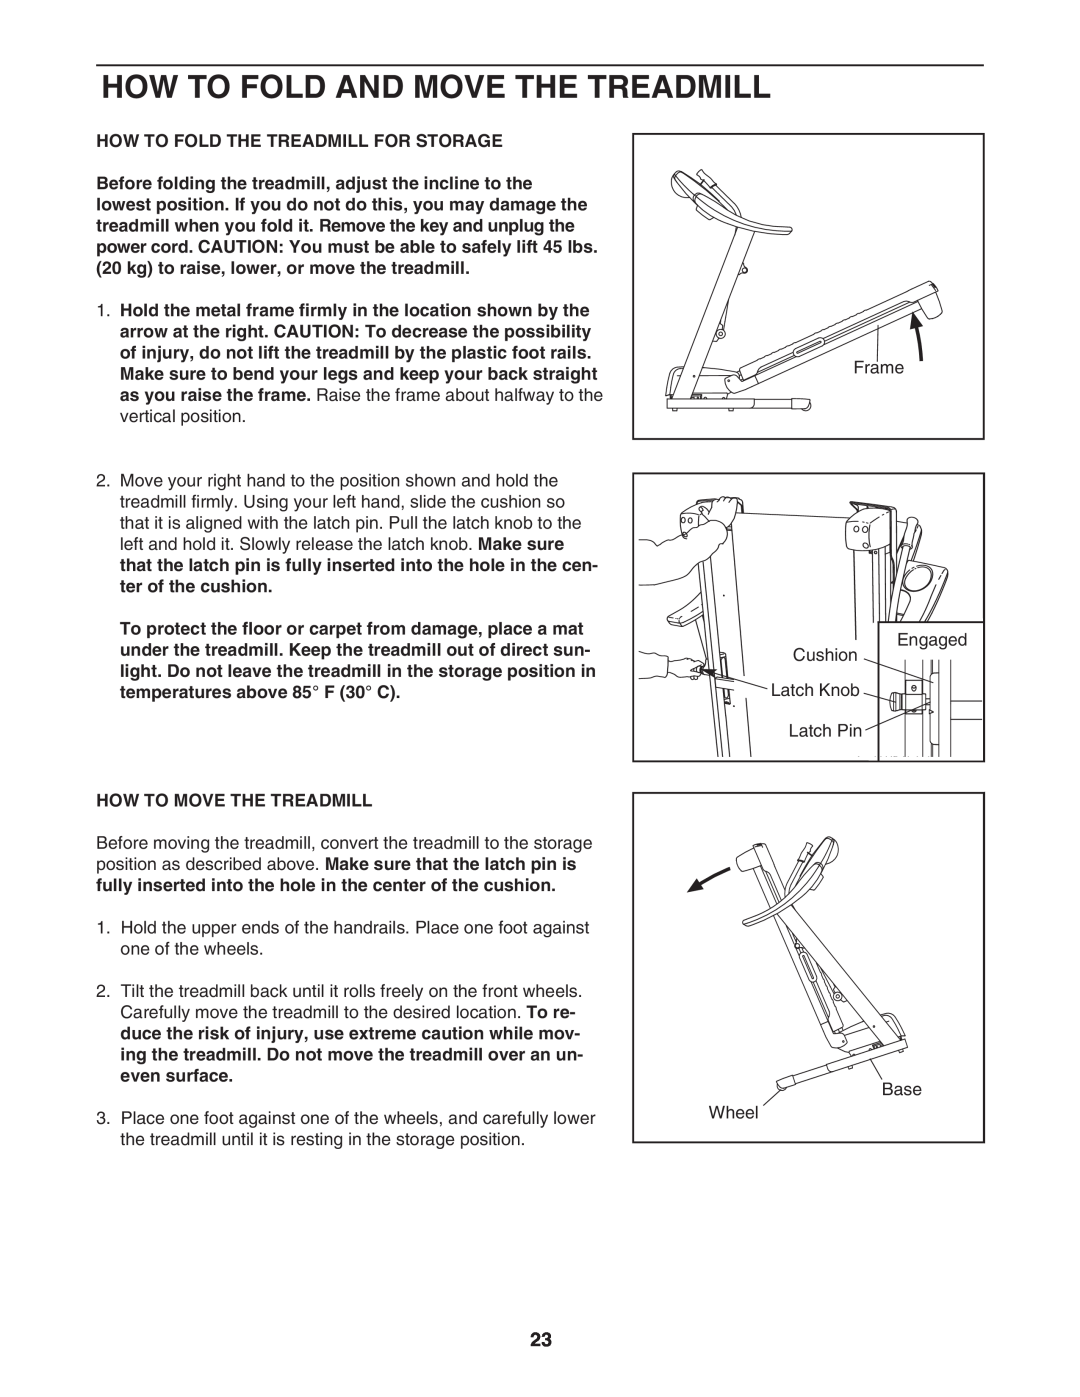 Gold's Gym CWTL05607 How To Fold And Move The Treadmill, How To Fold The Treadmill For Storage, How To Move The Treadmill 